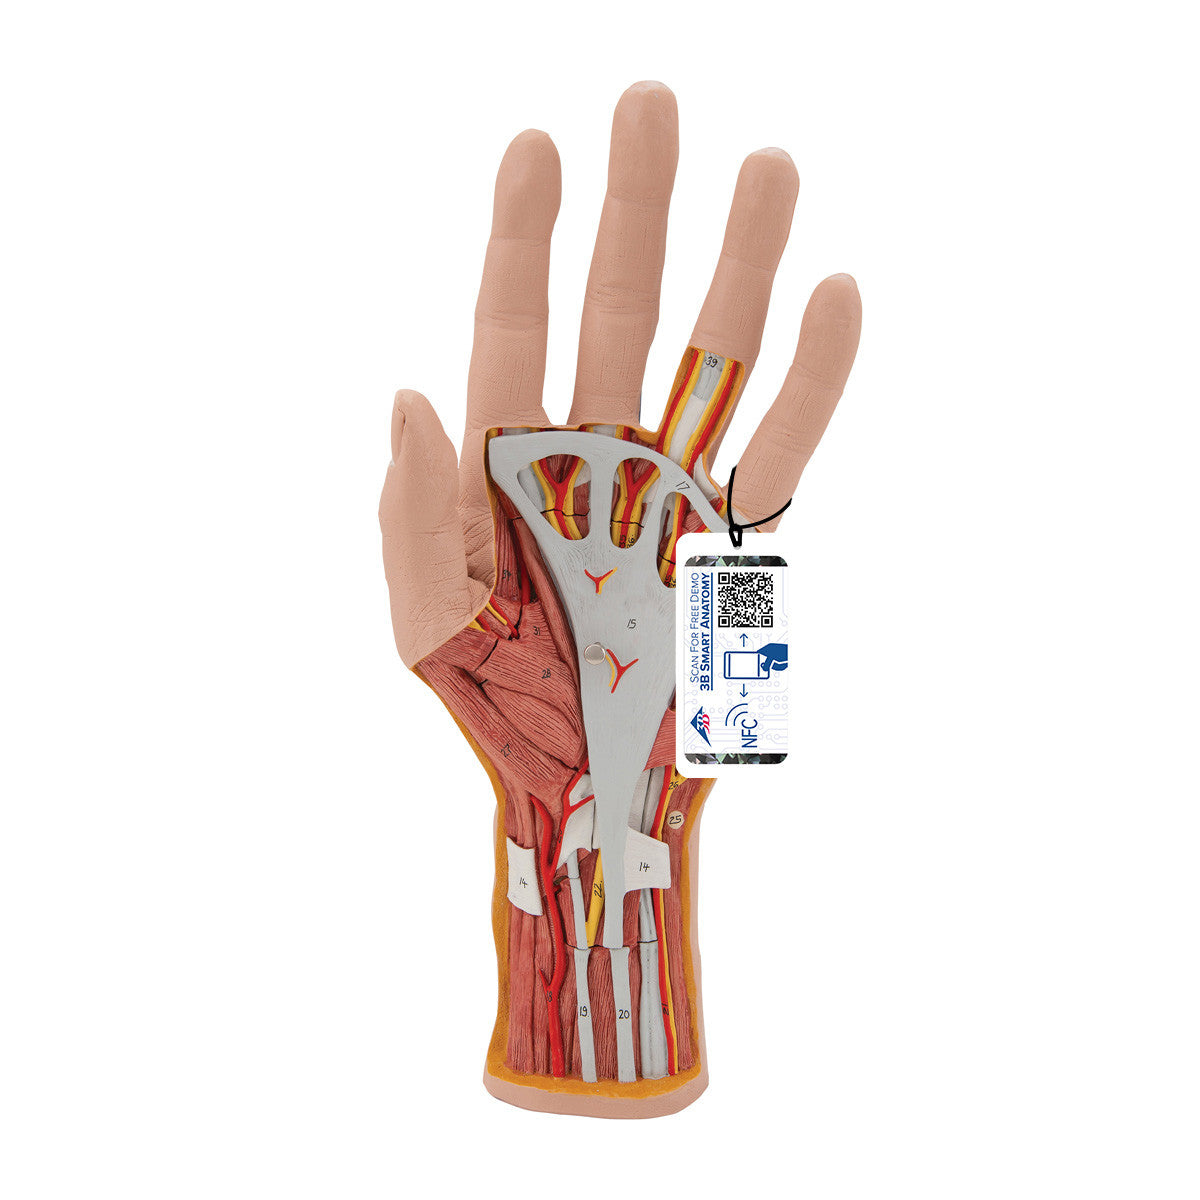 m18_01_1200_1200_life-size-hand-model-with-muscles-tendons-ligaments-nerves-arteries-3-part-3b-smart-anatomy__10139.1589752891.1280.1280.jpg